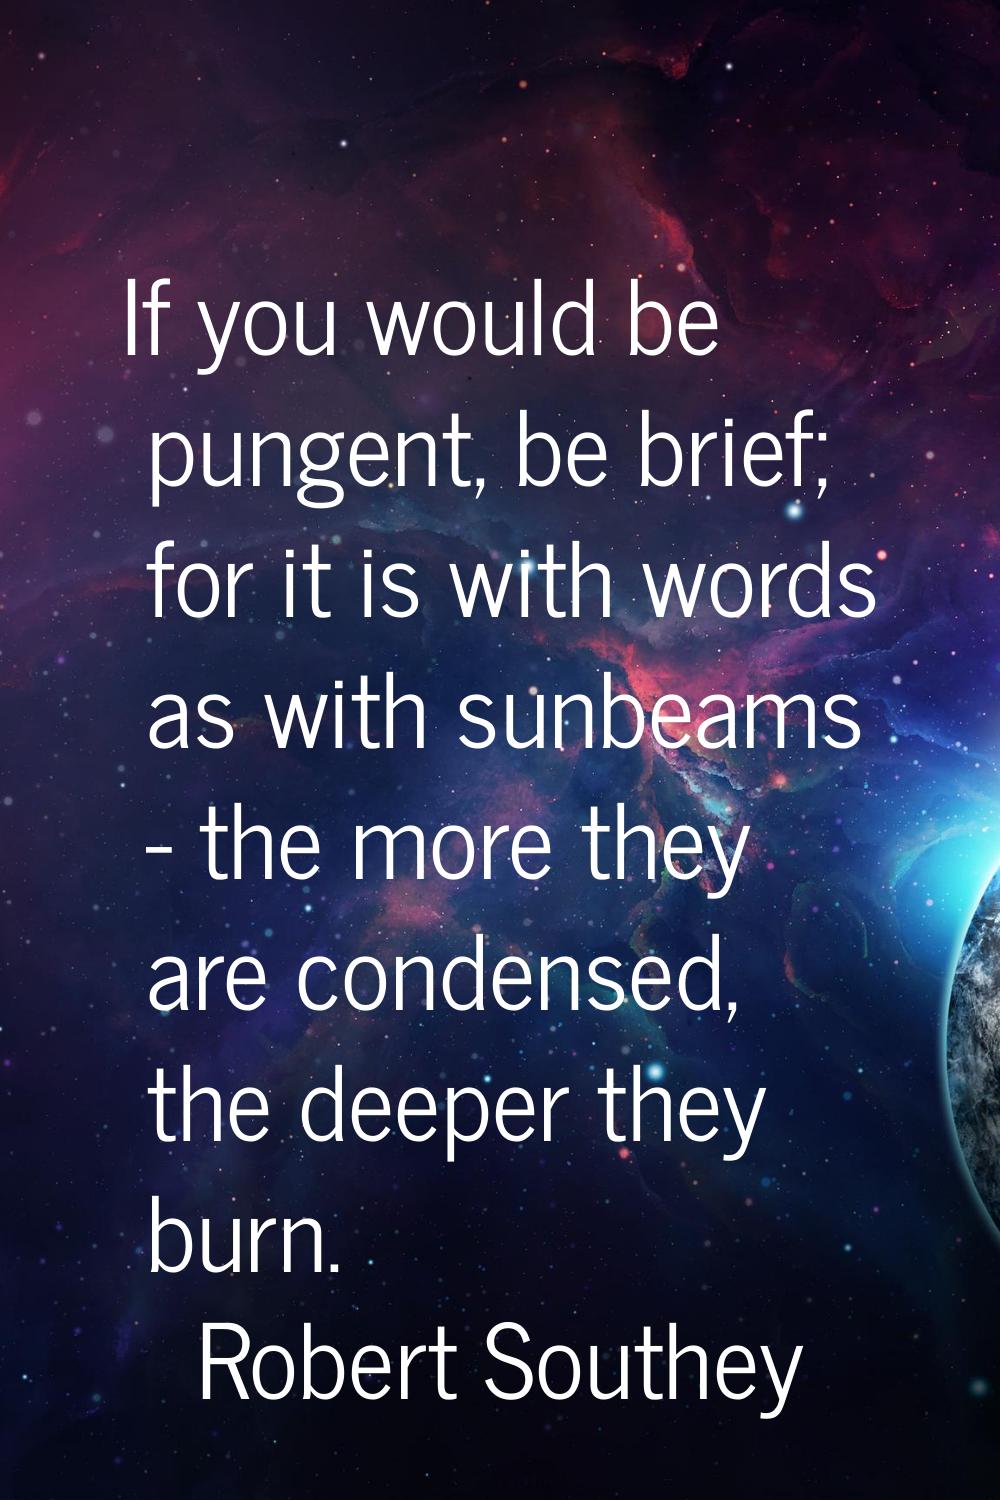 If you would be pungent, be brief; for it is with words as with sunbeams - the more they are conden